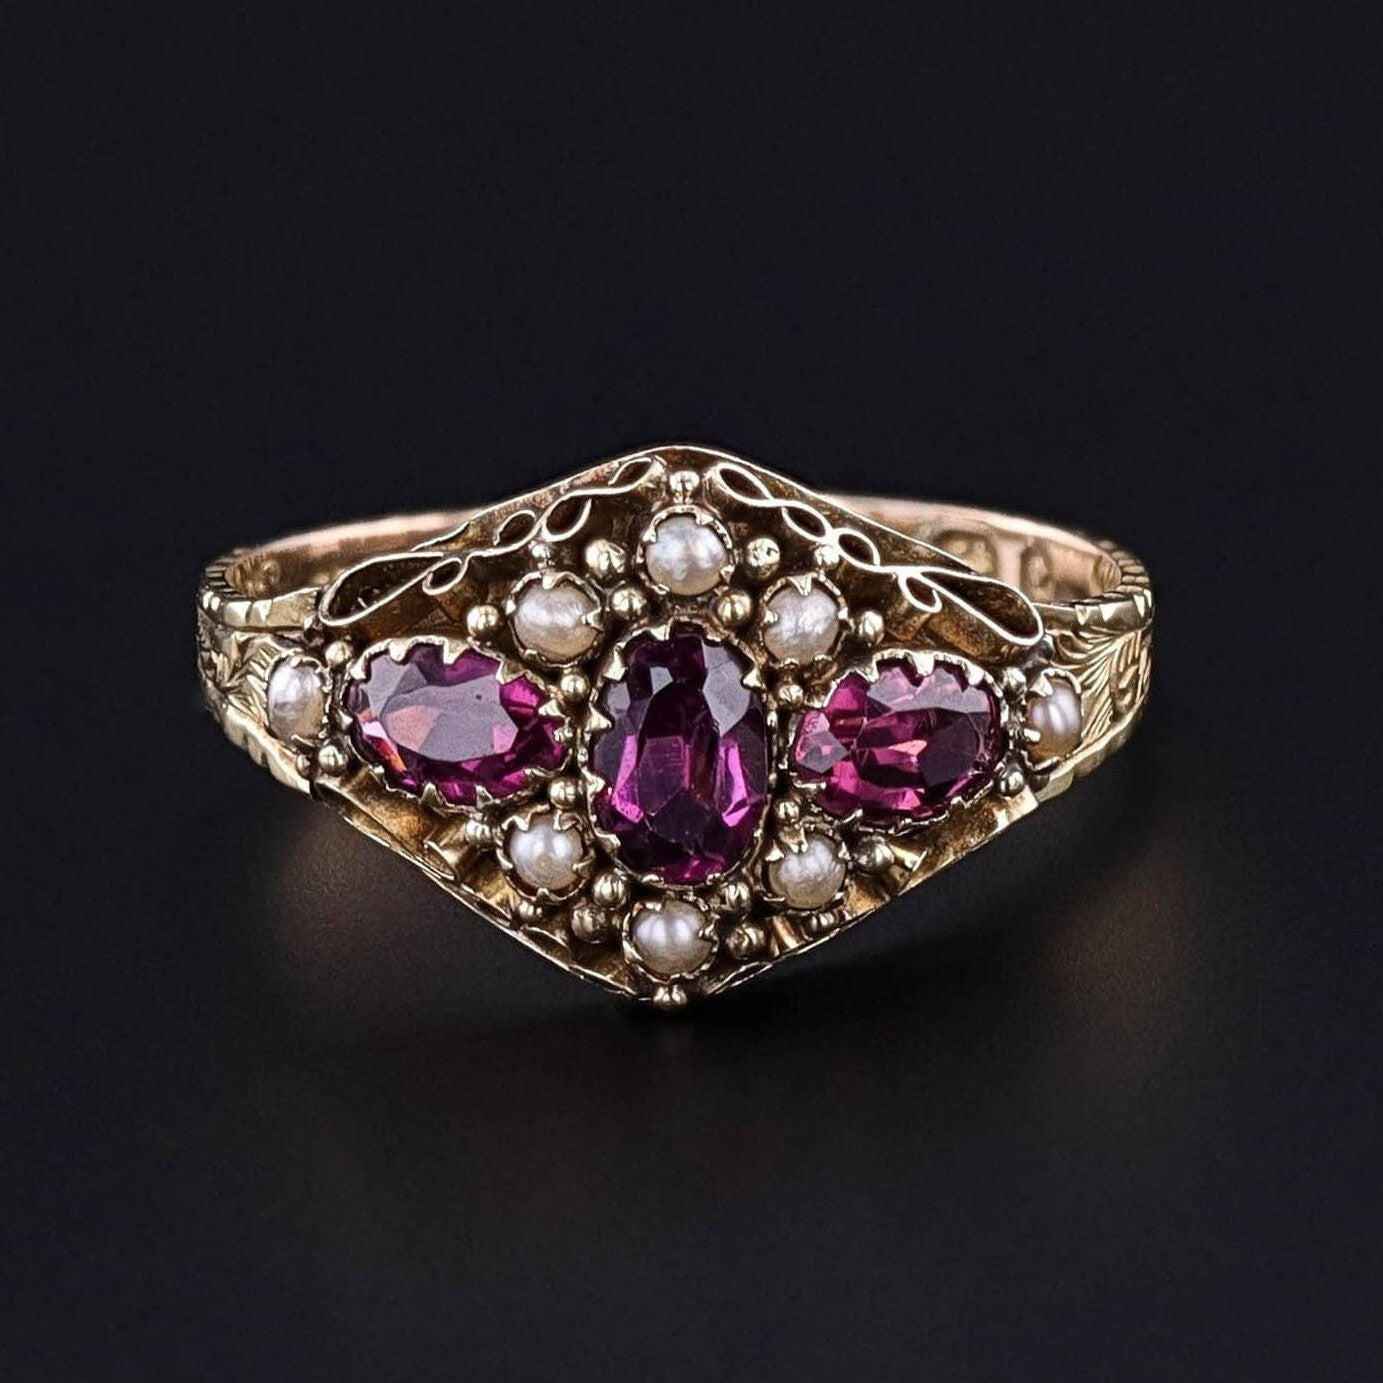 The front of our antique rhodolite garnet and pearl ring with an hand engraved band. The ring dates to the late Georgian era.